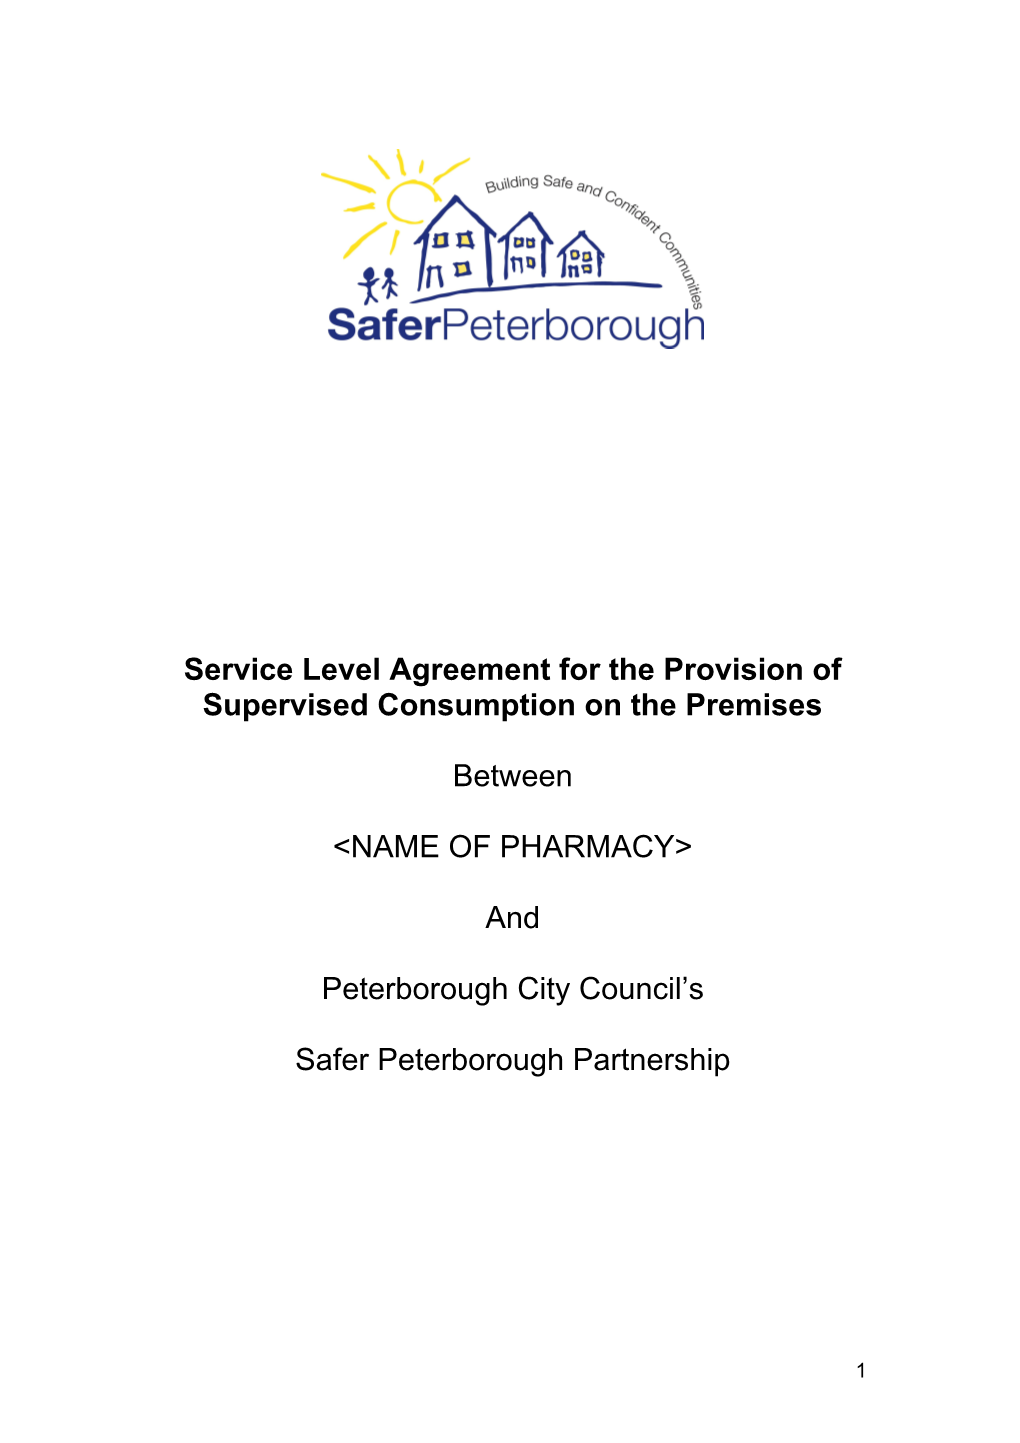 Service Level Agreement for the Provision of Consumption on the Premises